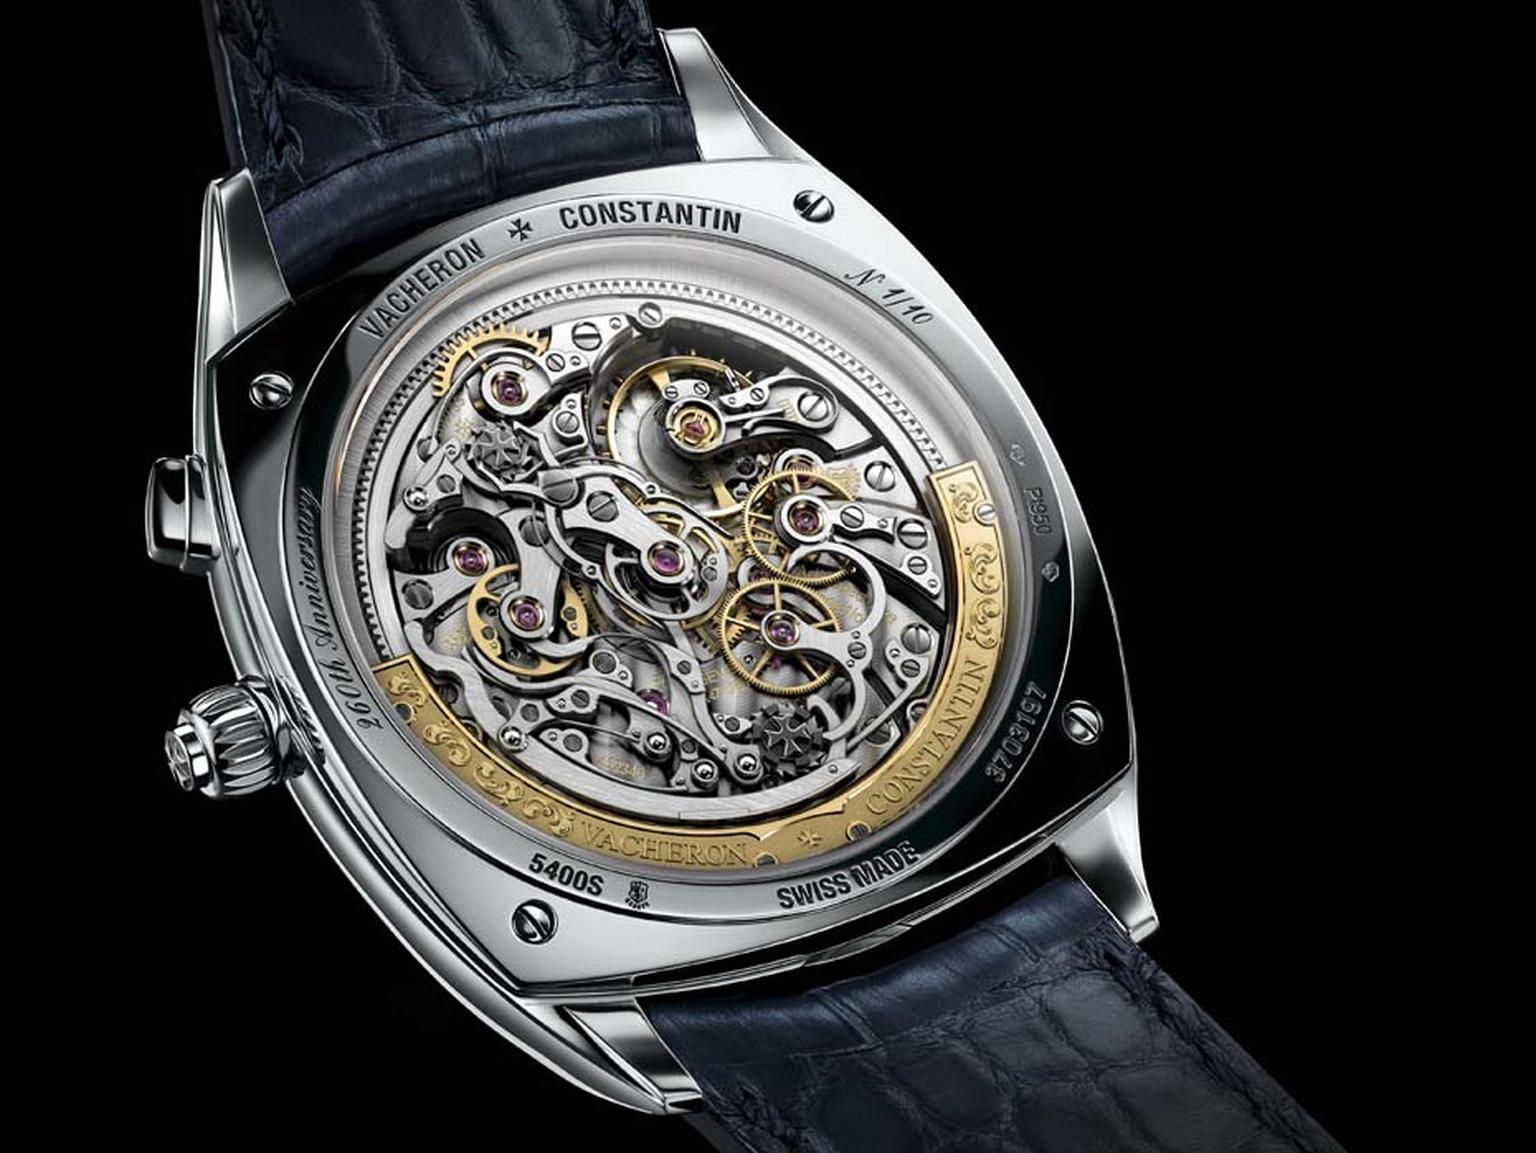 The ultra-thin chronograph features a gold peripheral rotor hand-engraved with a 260th anniversary pattern.